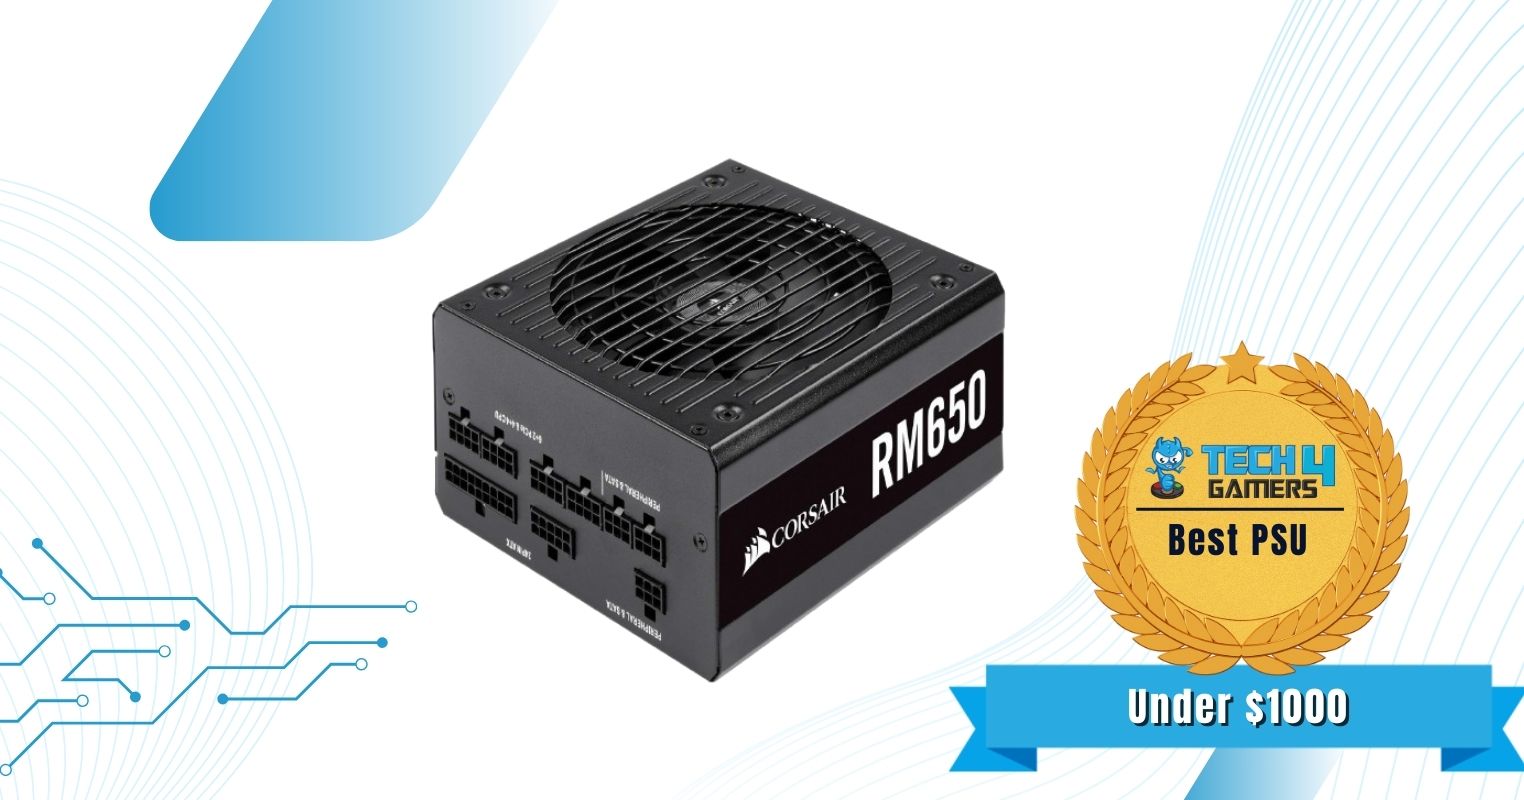 CORSAIR RM650 80 Plus Gold Fully Modular - Best $1000 Gaming PC Build Power Supply